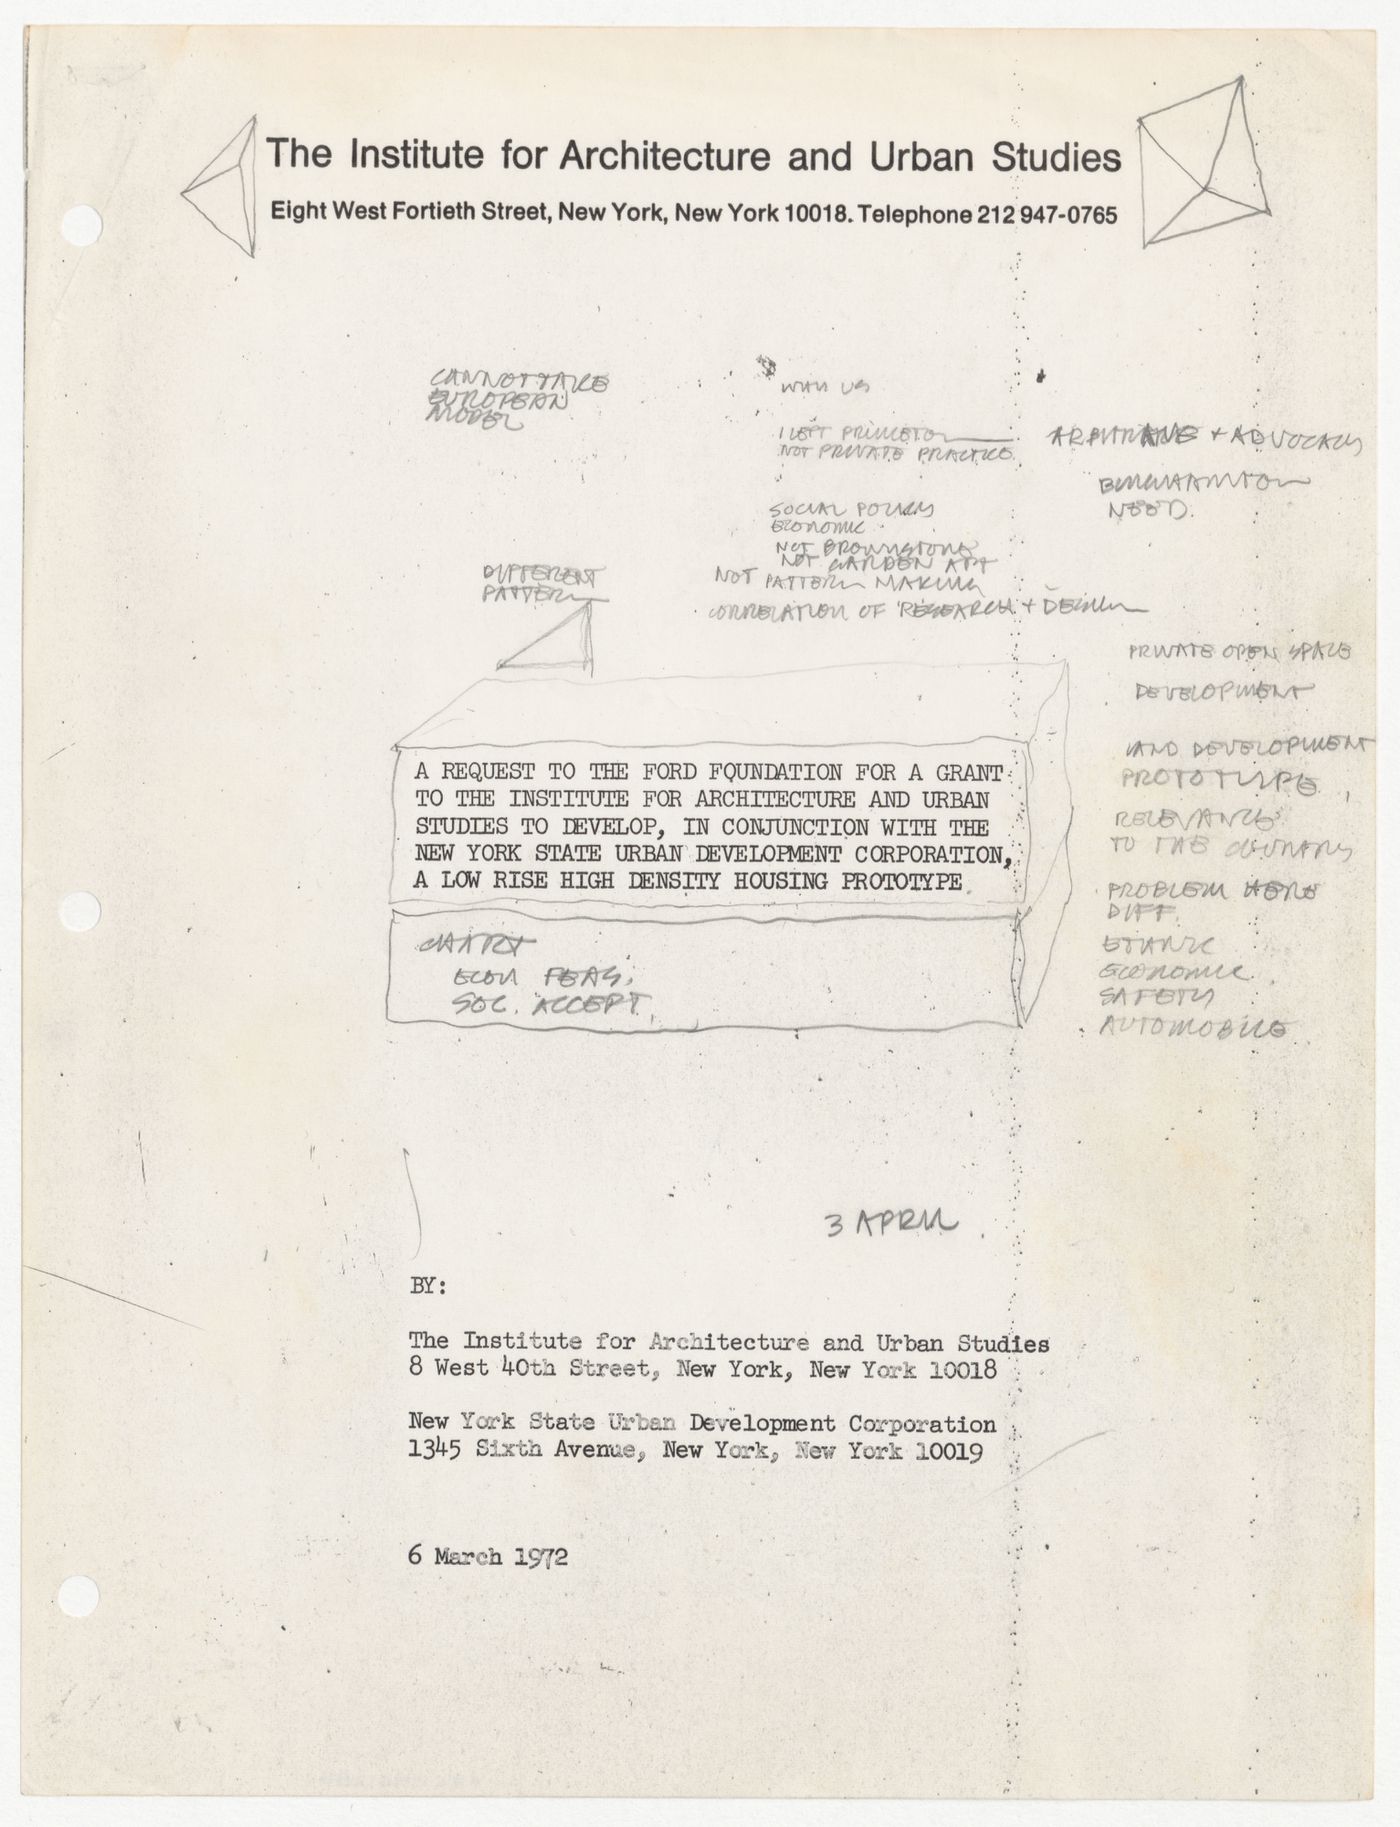 Cover page of request to the Ford Foundation for a grant to develop a Low-Rise High-Density (LRHD) prototype with annotations by Peter D. Eisenman